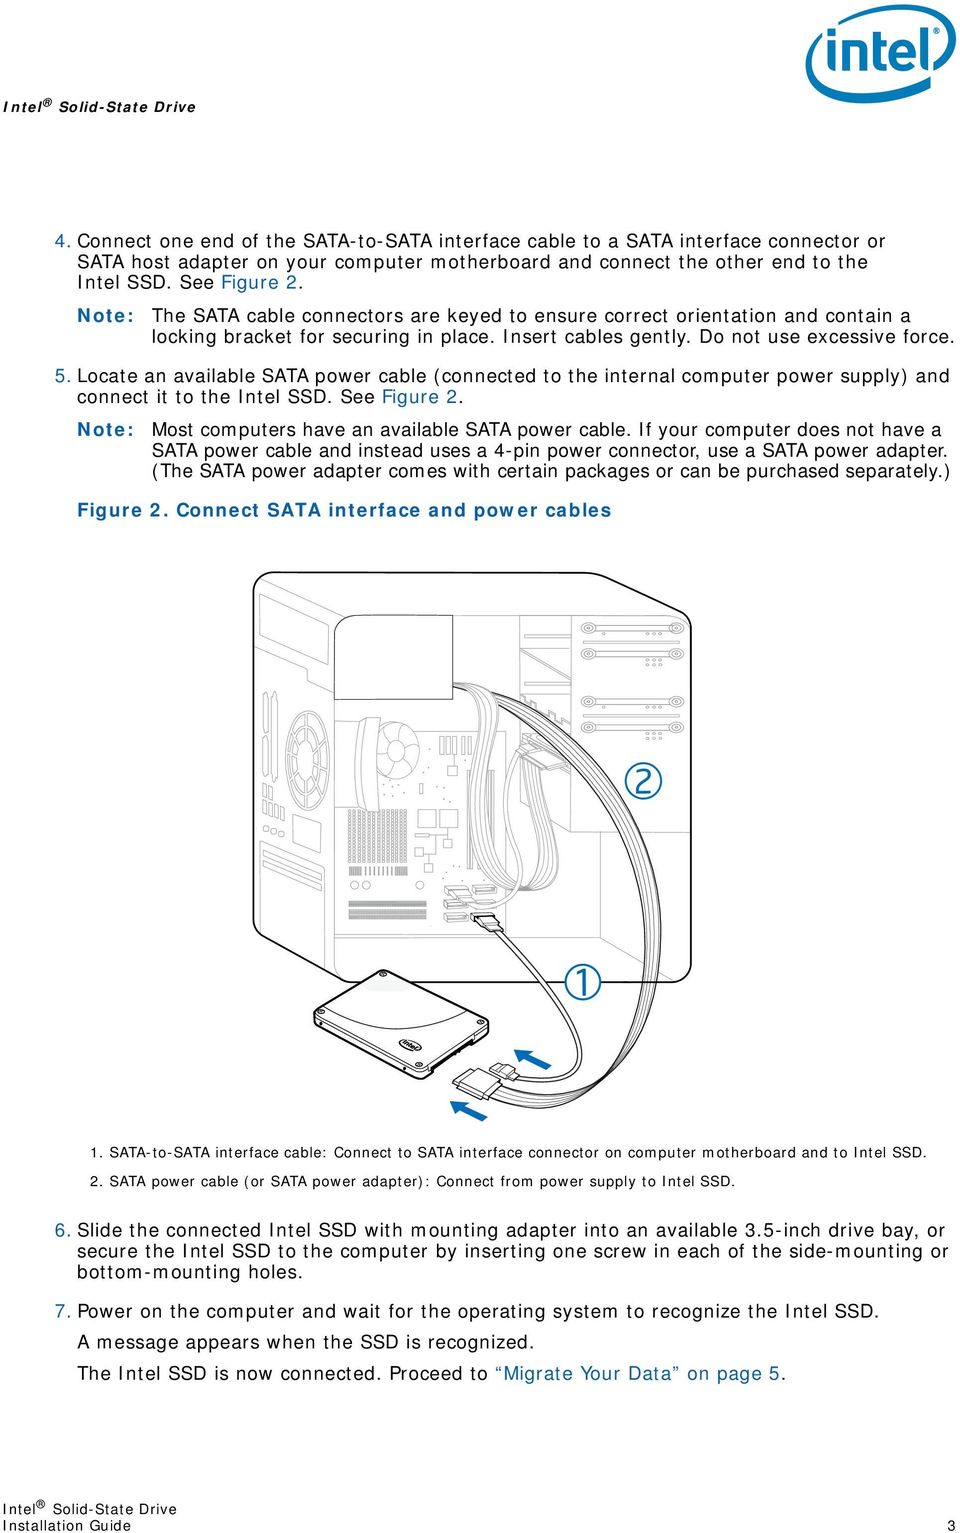 Locate an available SATA power cable (connected to the internal computer power supply) and connect it to the Intel SSD. See Figure 2. Note: Most computers have an available SATA power cable.